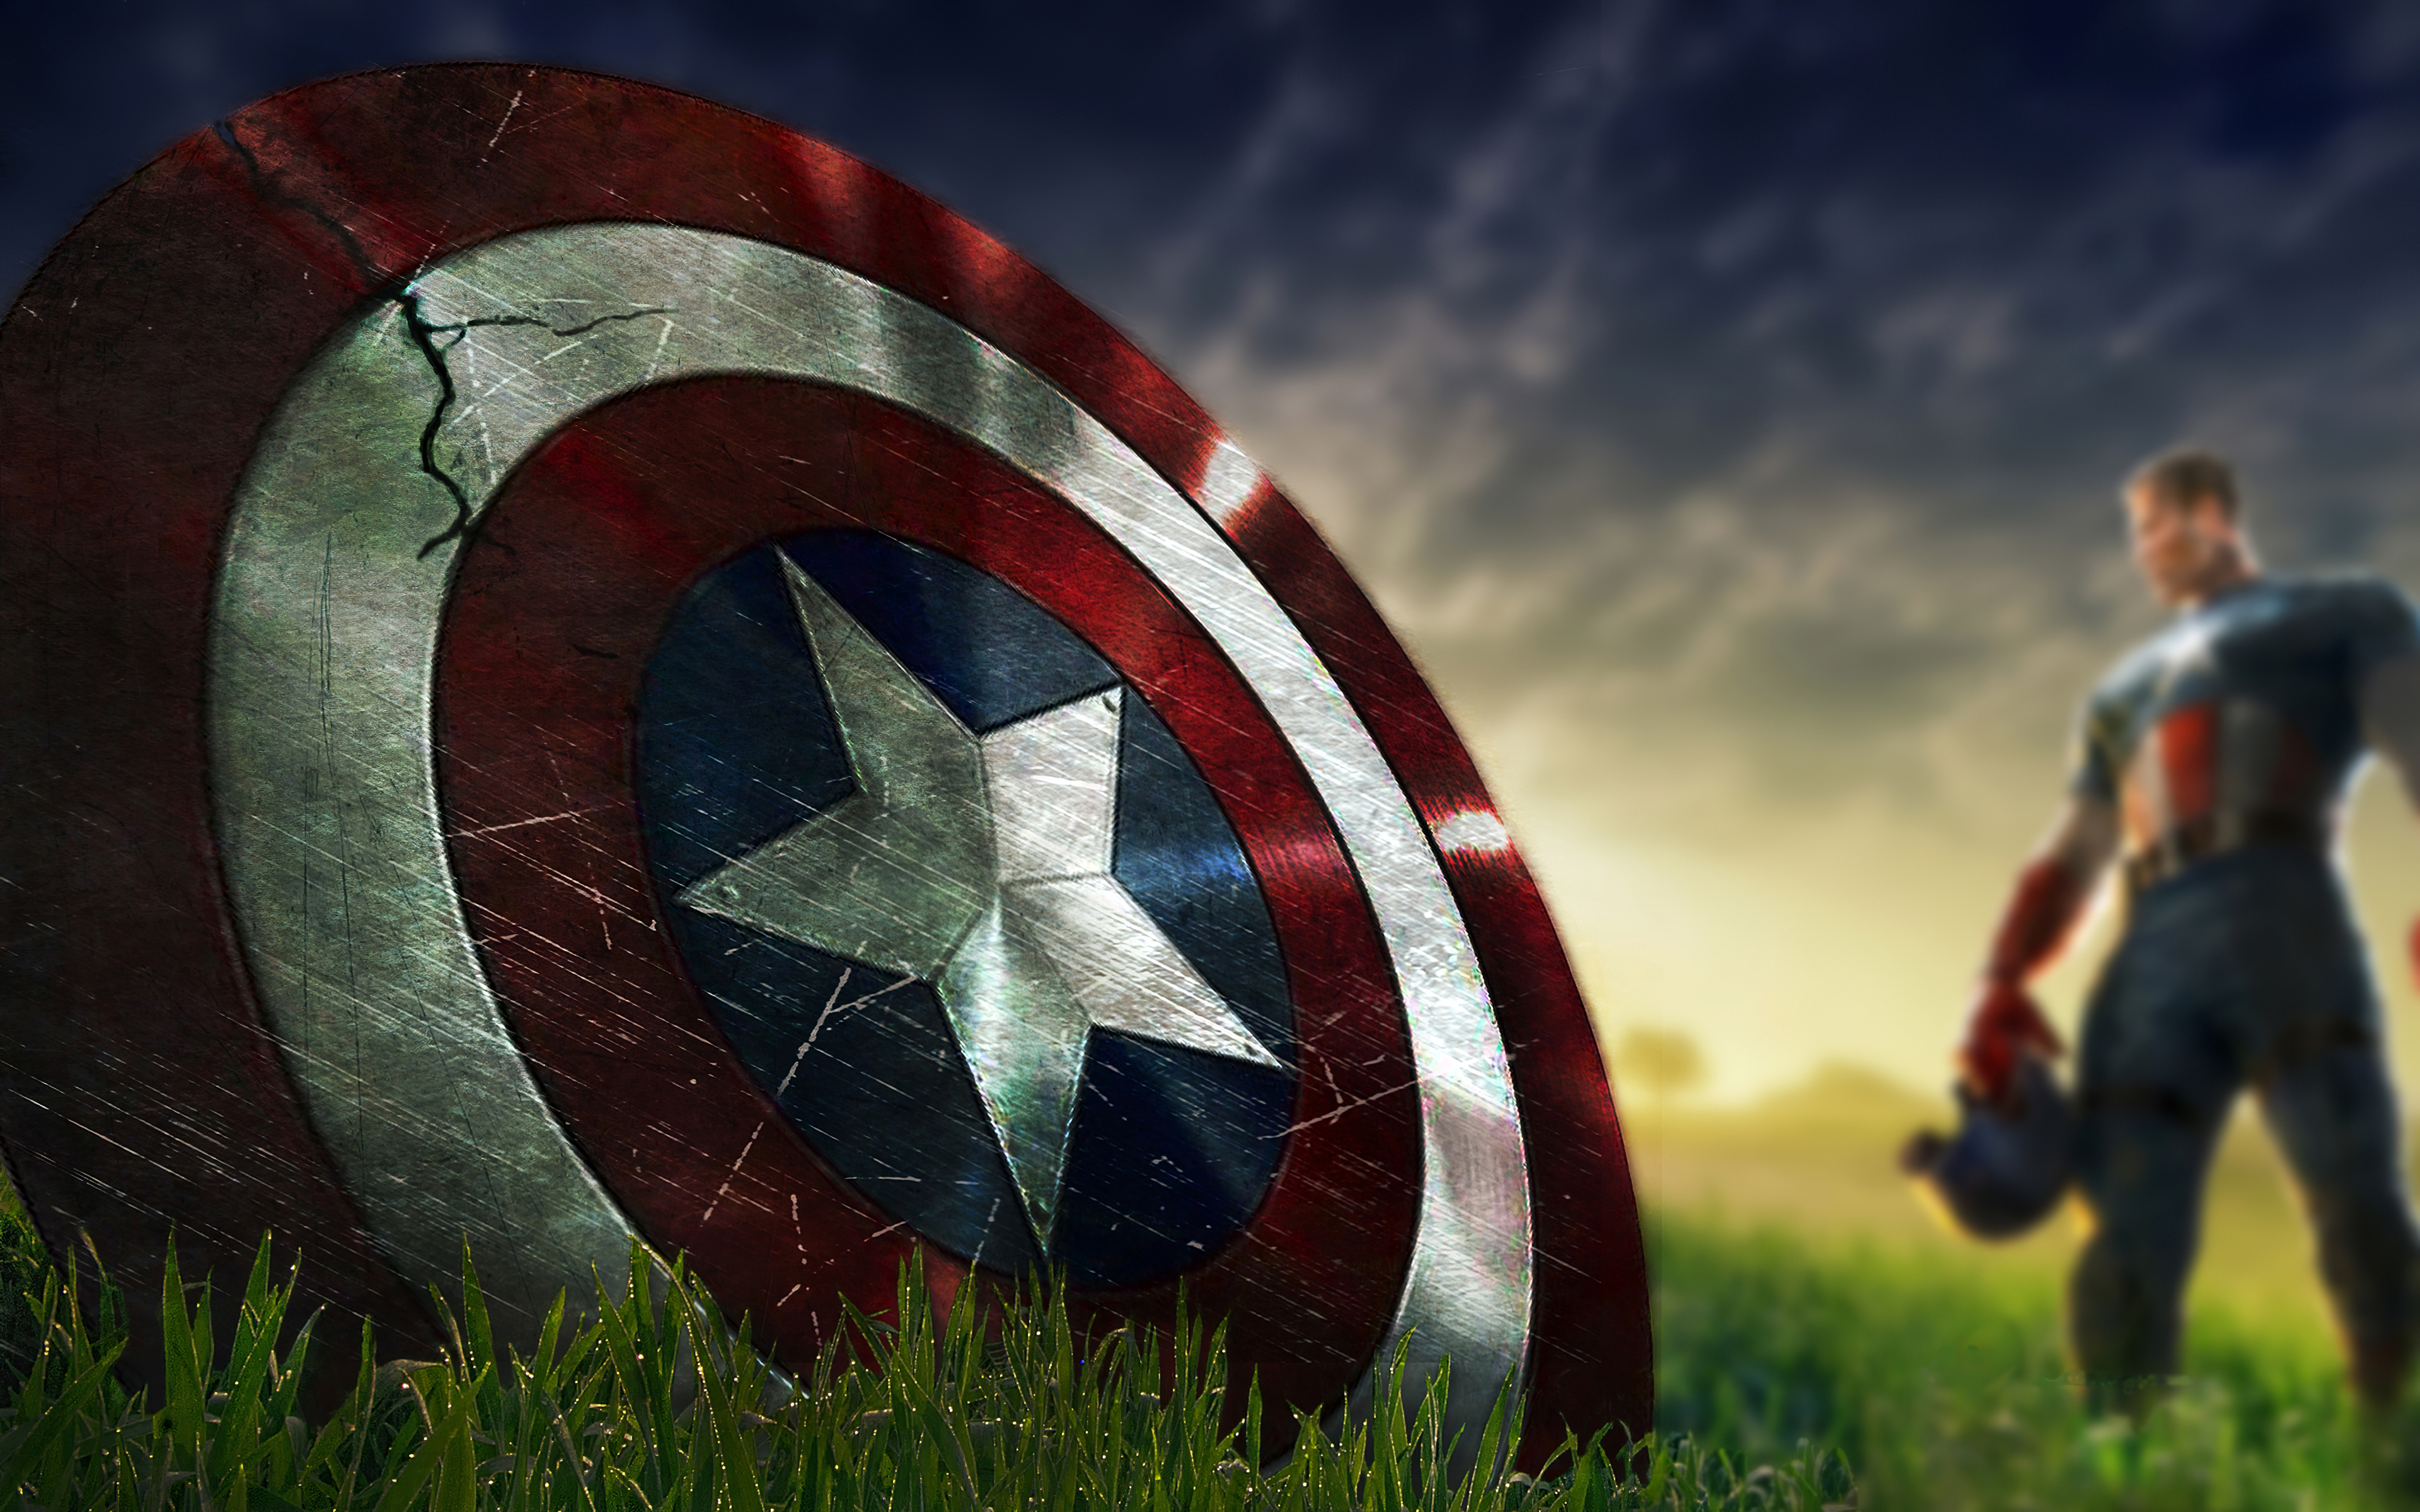 Captain America Shield IPhone Wallpaper (75+ images)